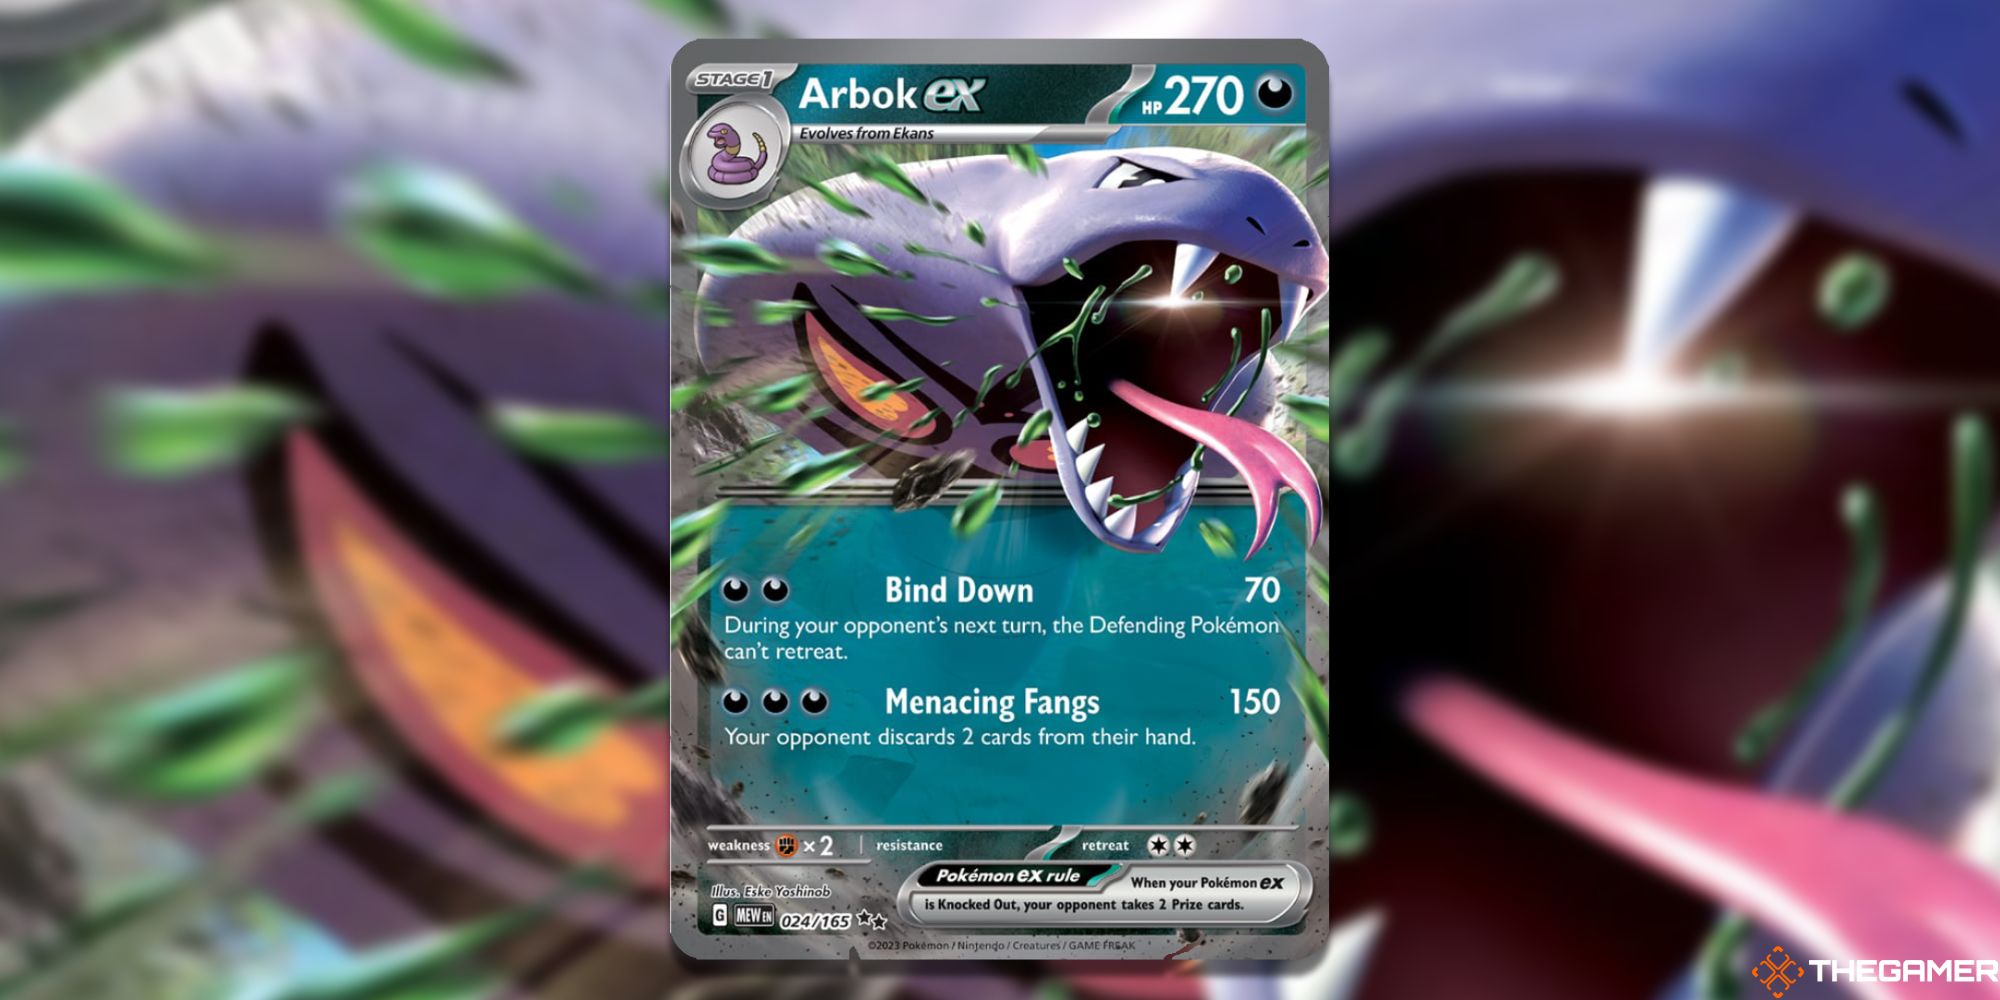 Image of the Arbok ex card in Magic: The Gathering, with art by Eske Yashinob